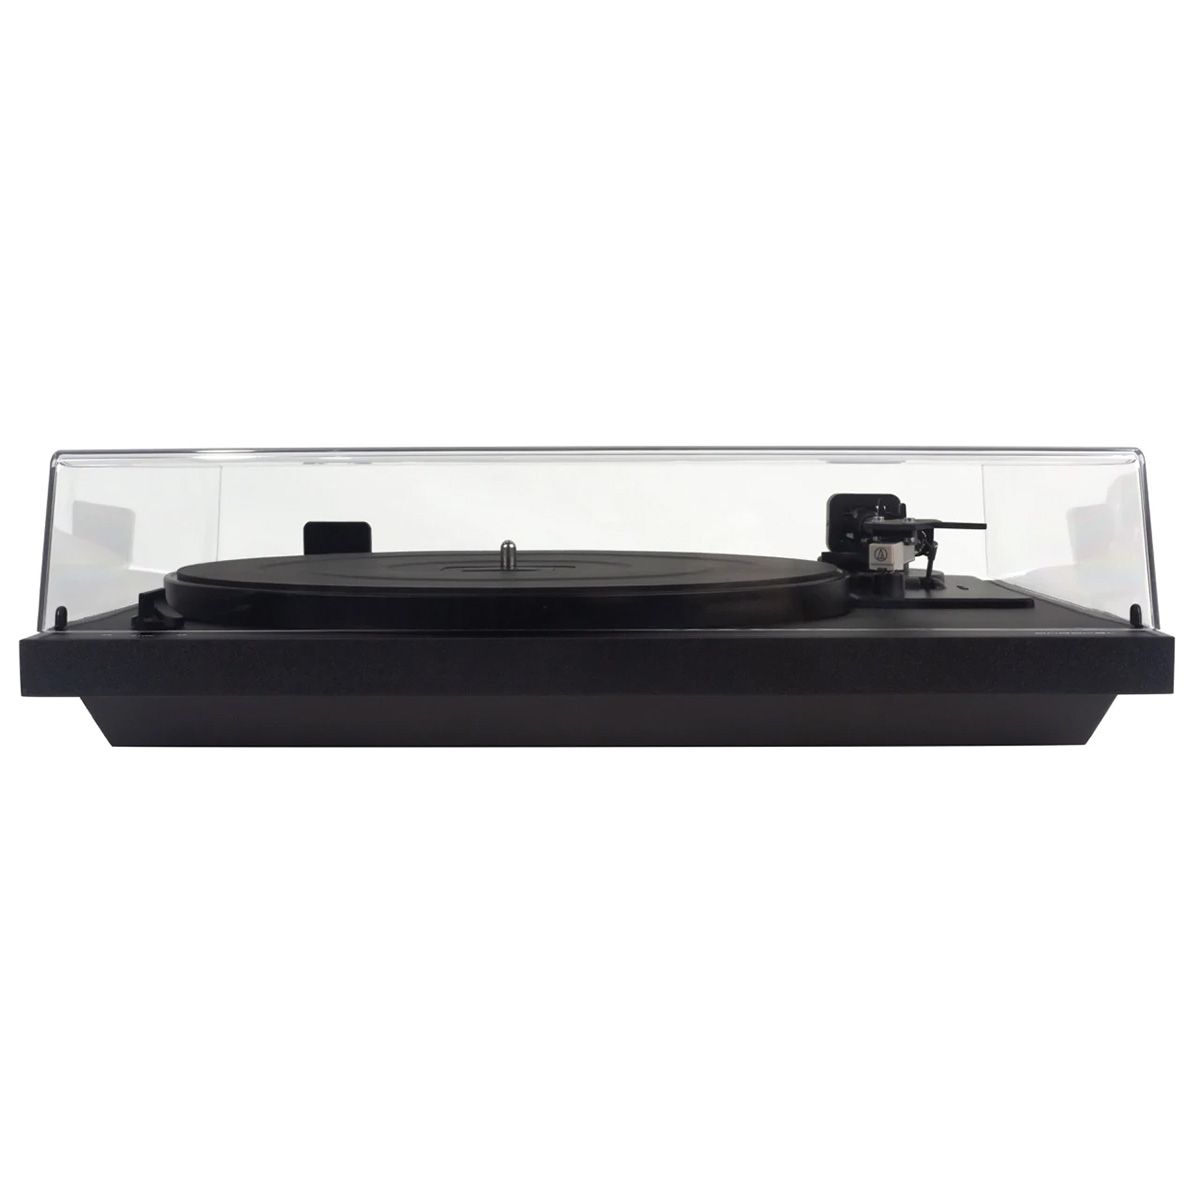 Andover Audio SpinDeck 2 Semi-Automatic Turntable - black with closed dustcover, front profile view